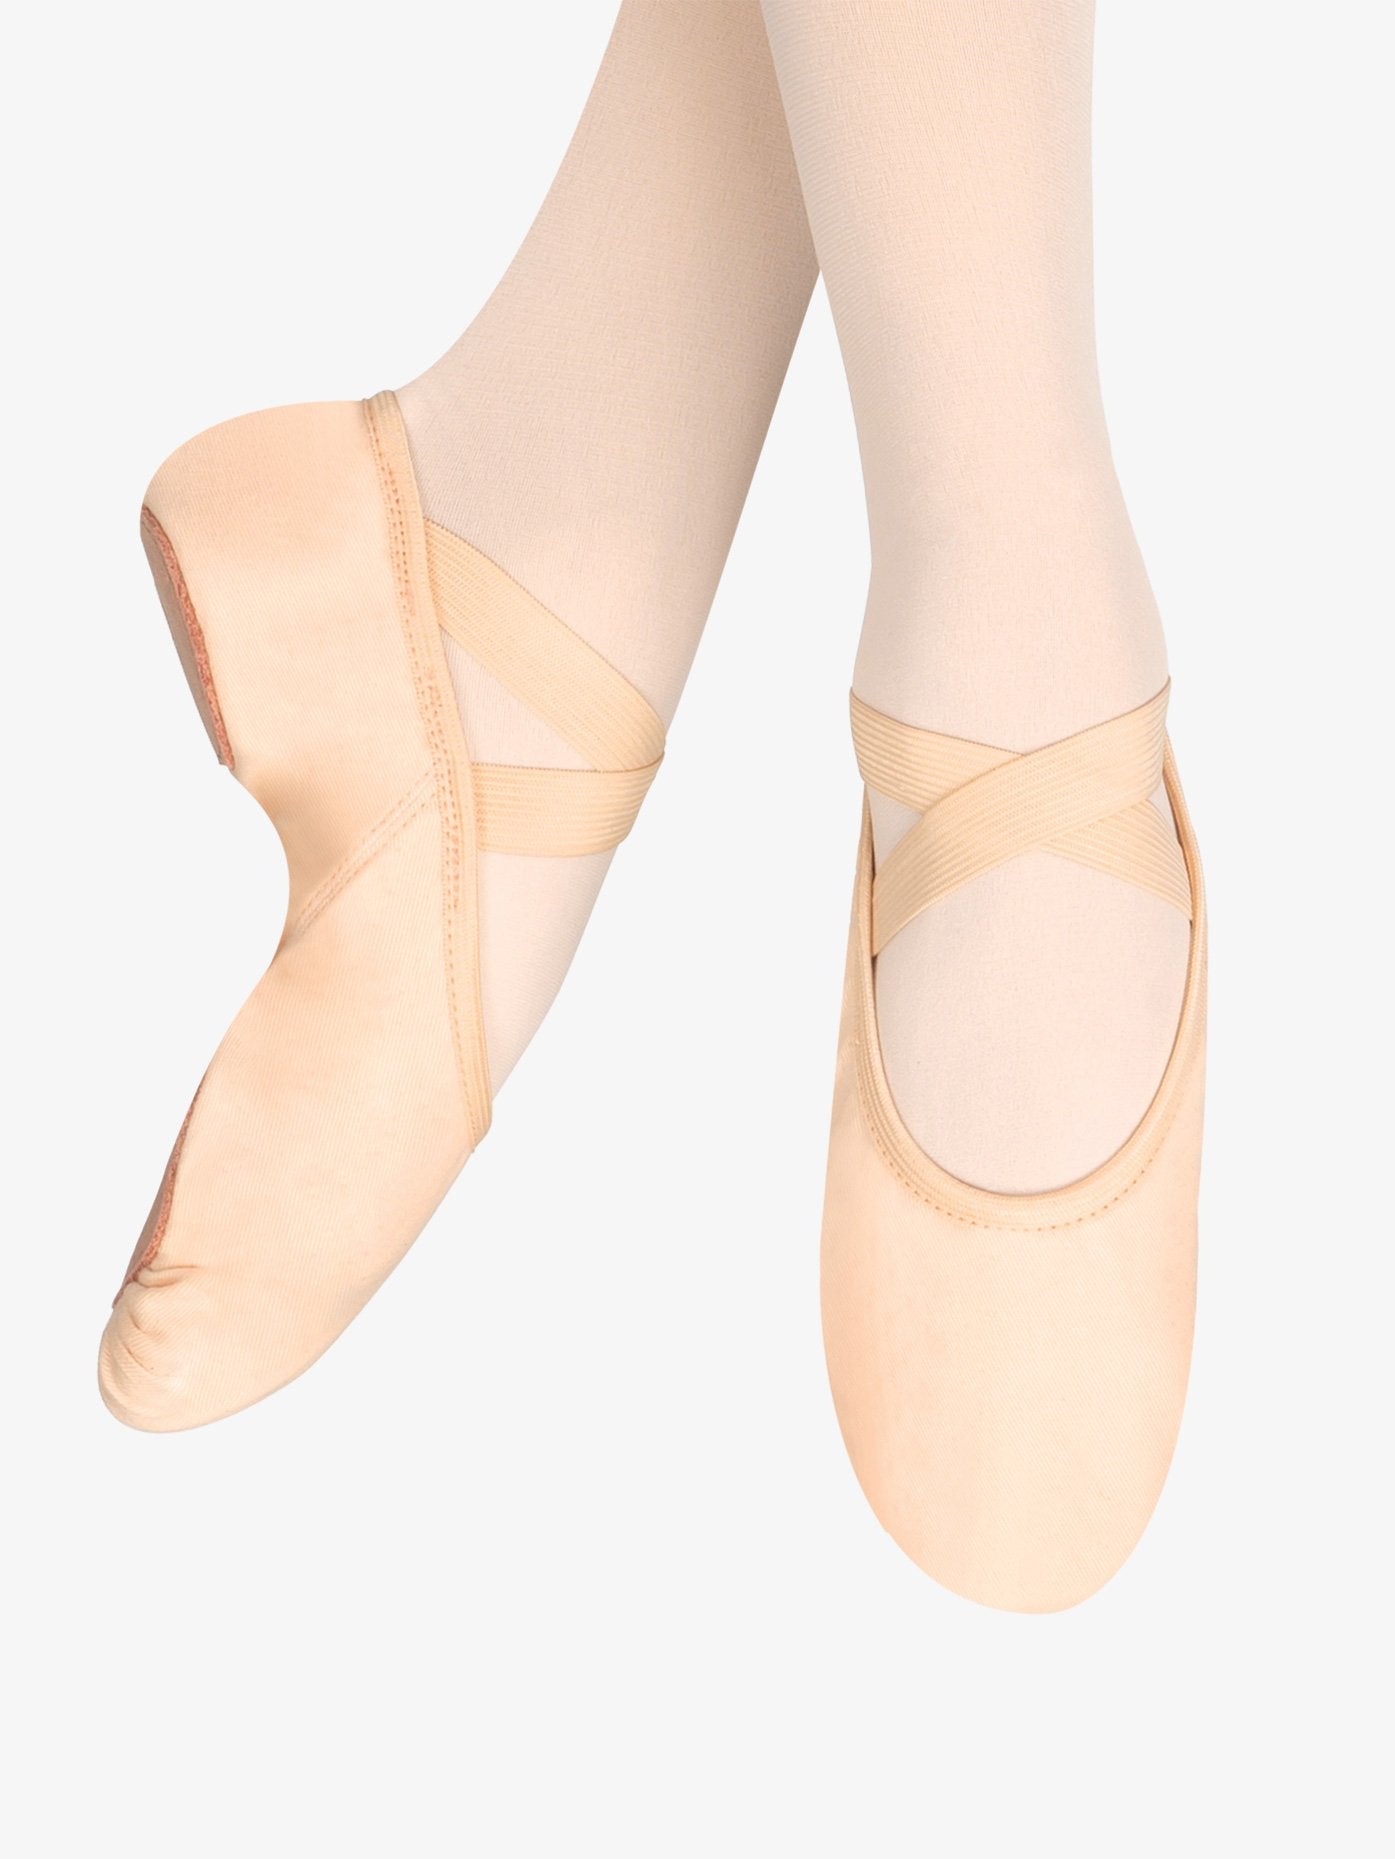 Adult True Bare multi-stretch canvas pink ballet slipper with flexible and supportive design